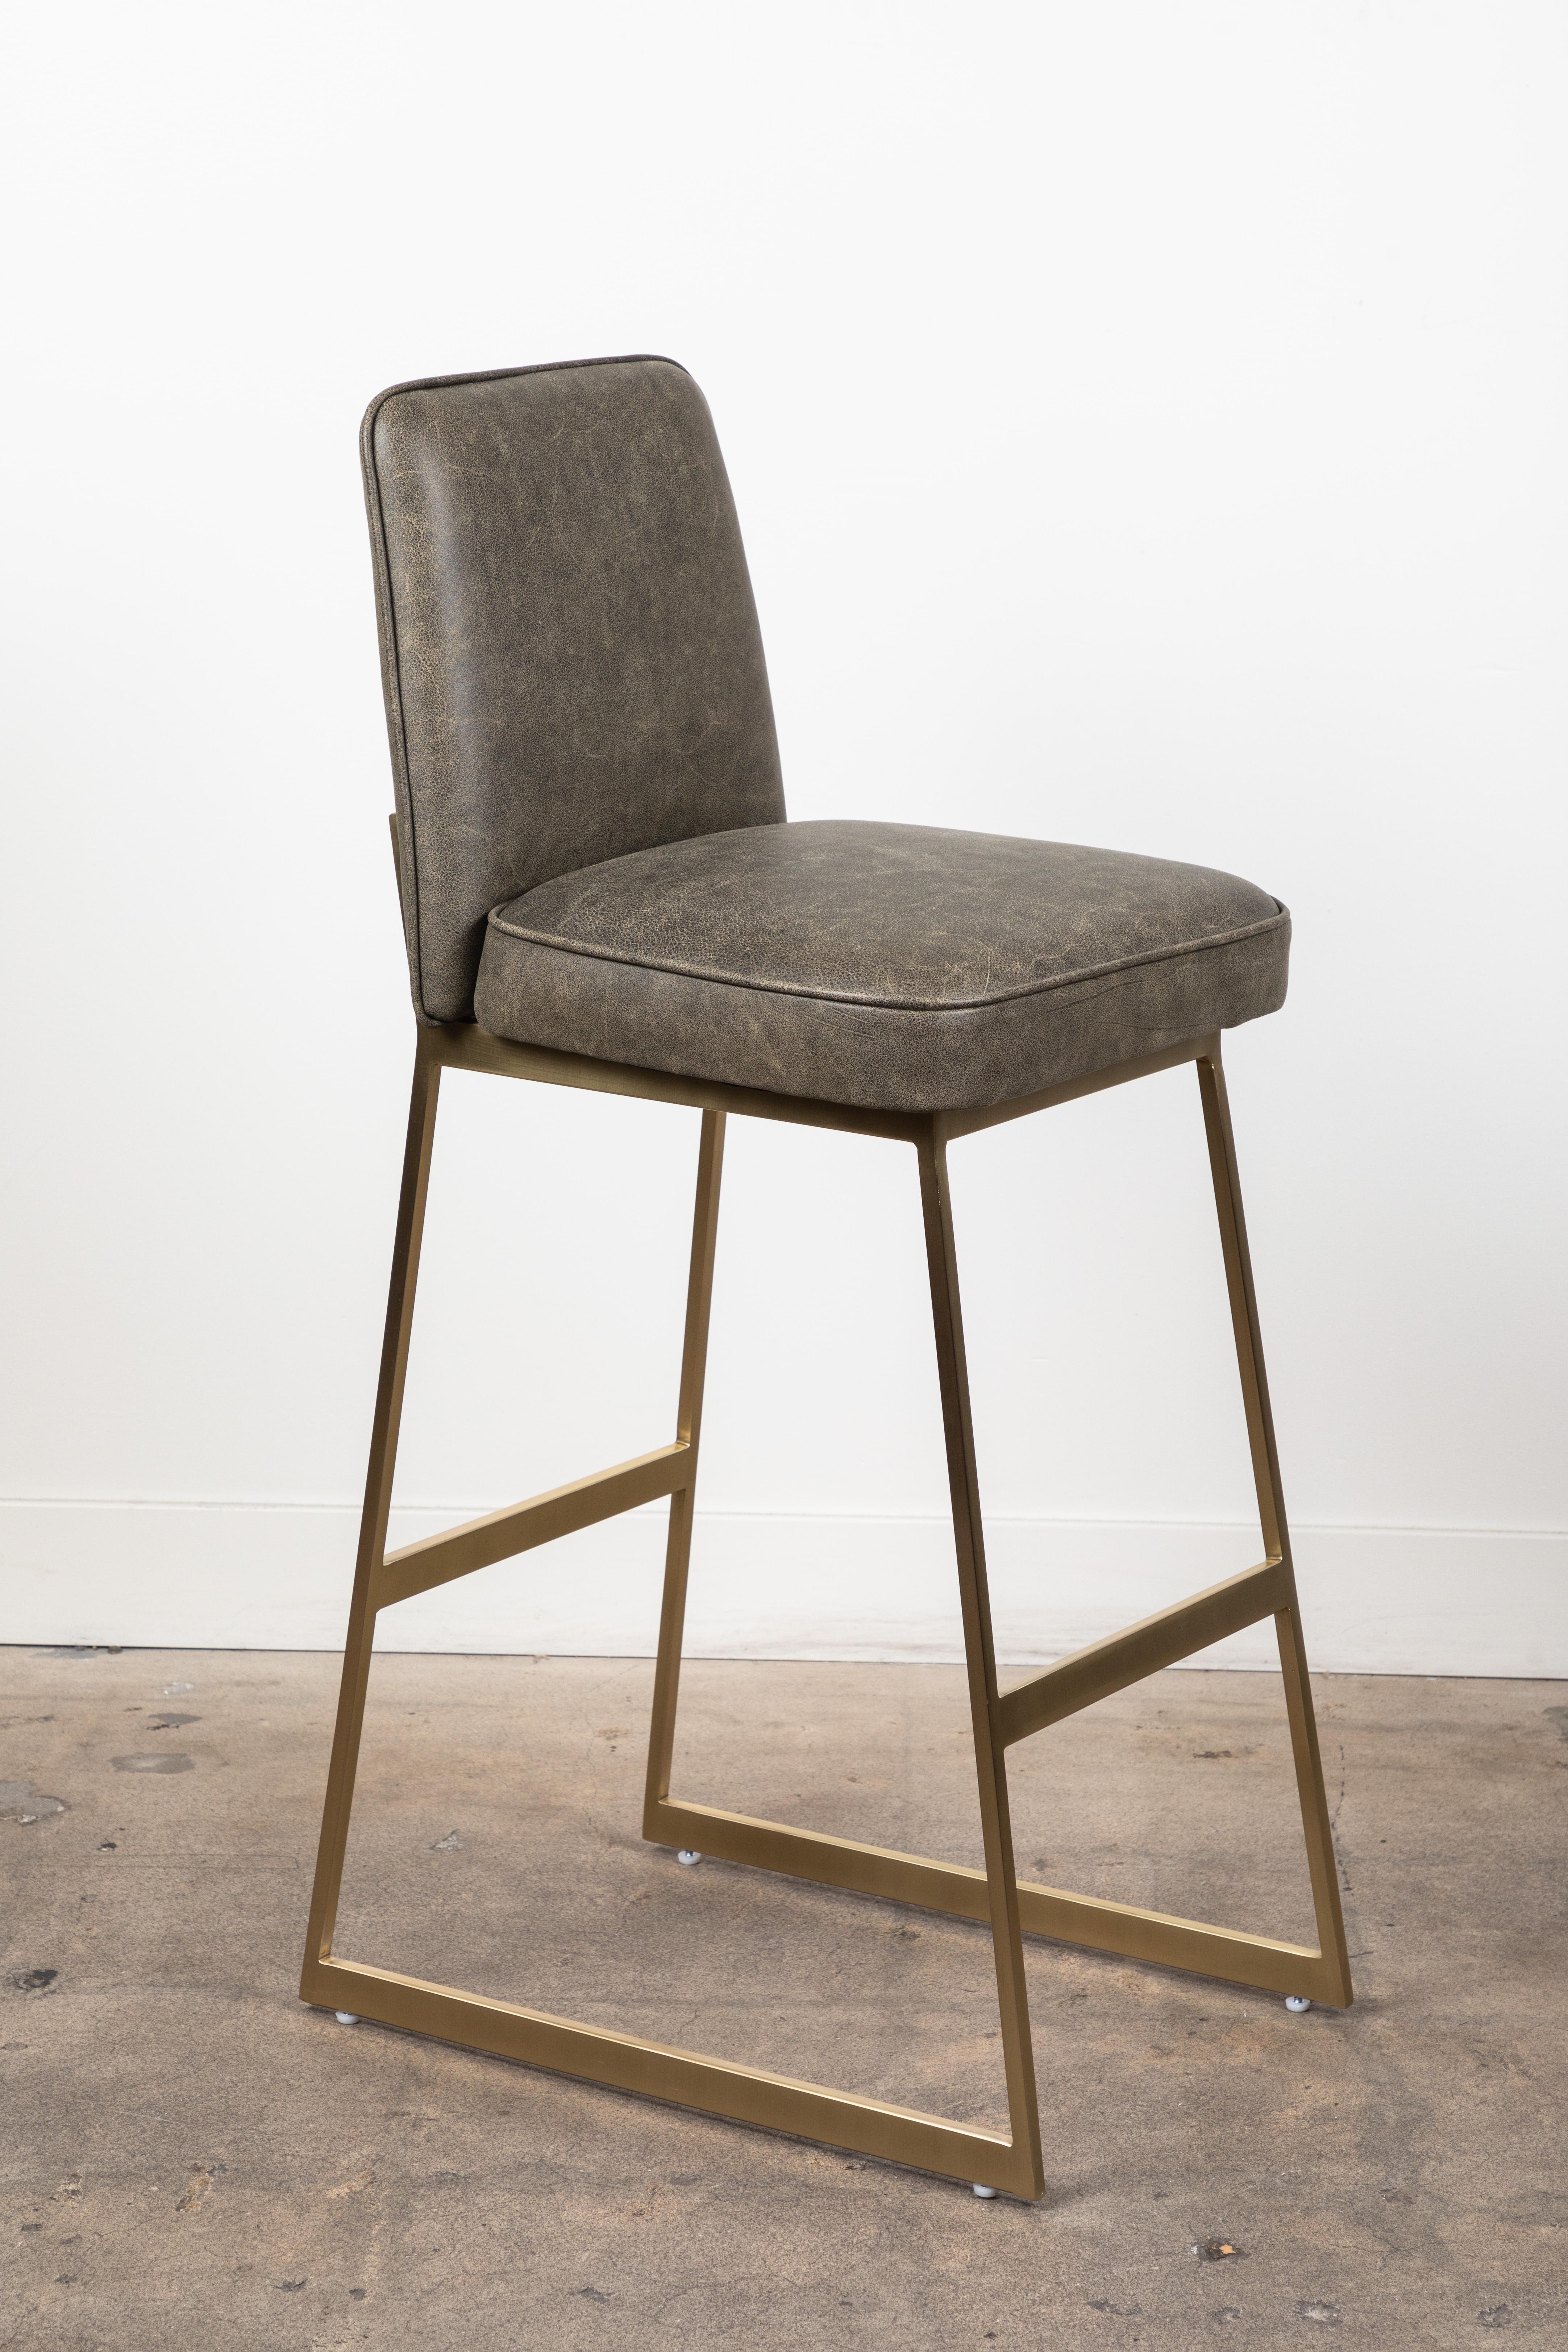 The Elysian barstool is a modern take on the Classic stool.

Available to order in customer's own material with a 6-8 week lead time. 

As shown: $1,502
To order: $1,250 + COM.
 